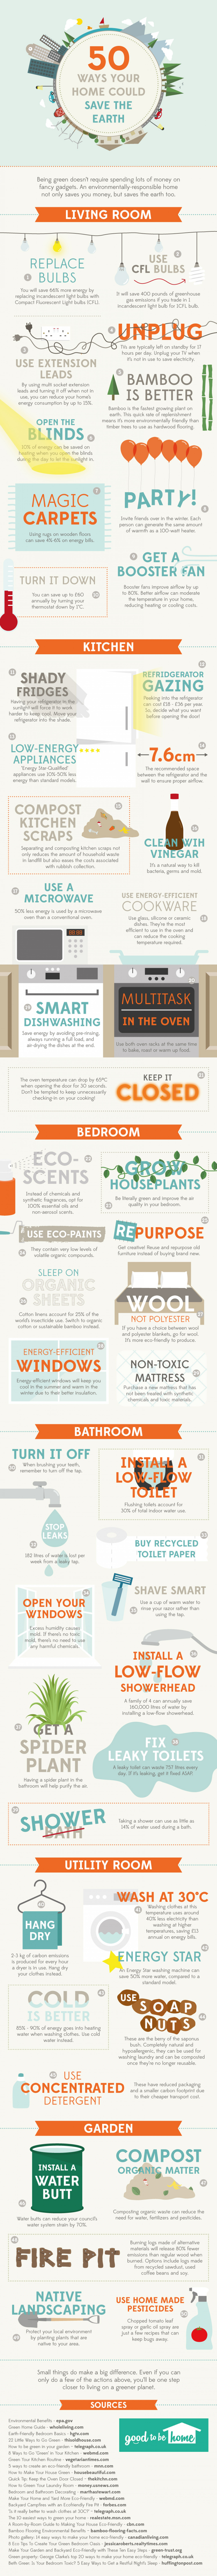 50 Ways Your Home Could Save the Earth Infographic